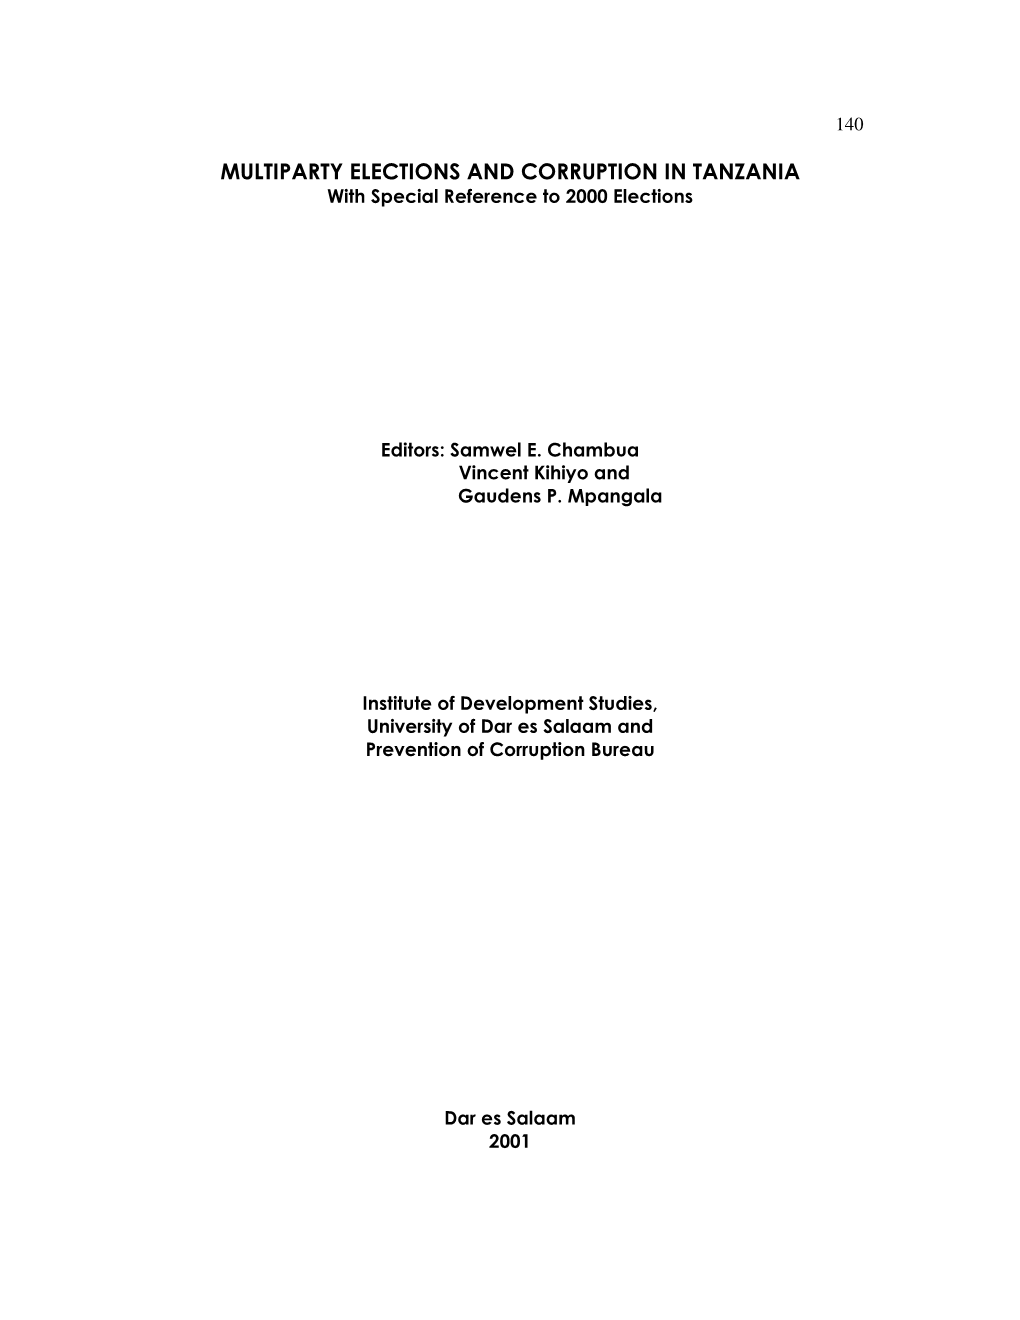 MULTIPARTY ELECTIONS and CORRUPTION in TANZANIA with Special Reference to 2000 Elections